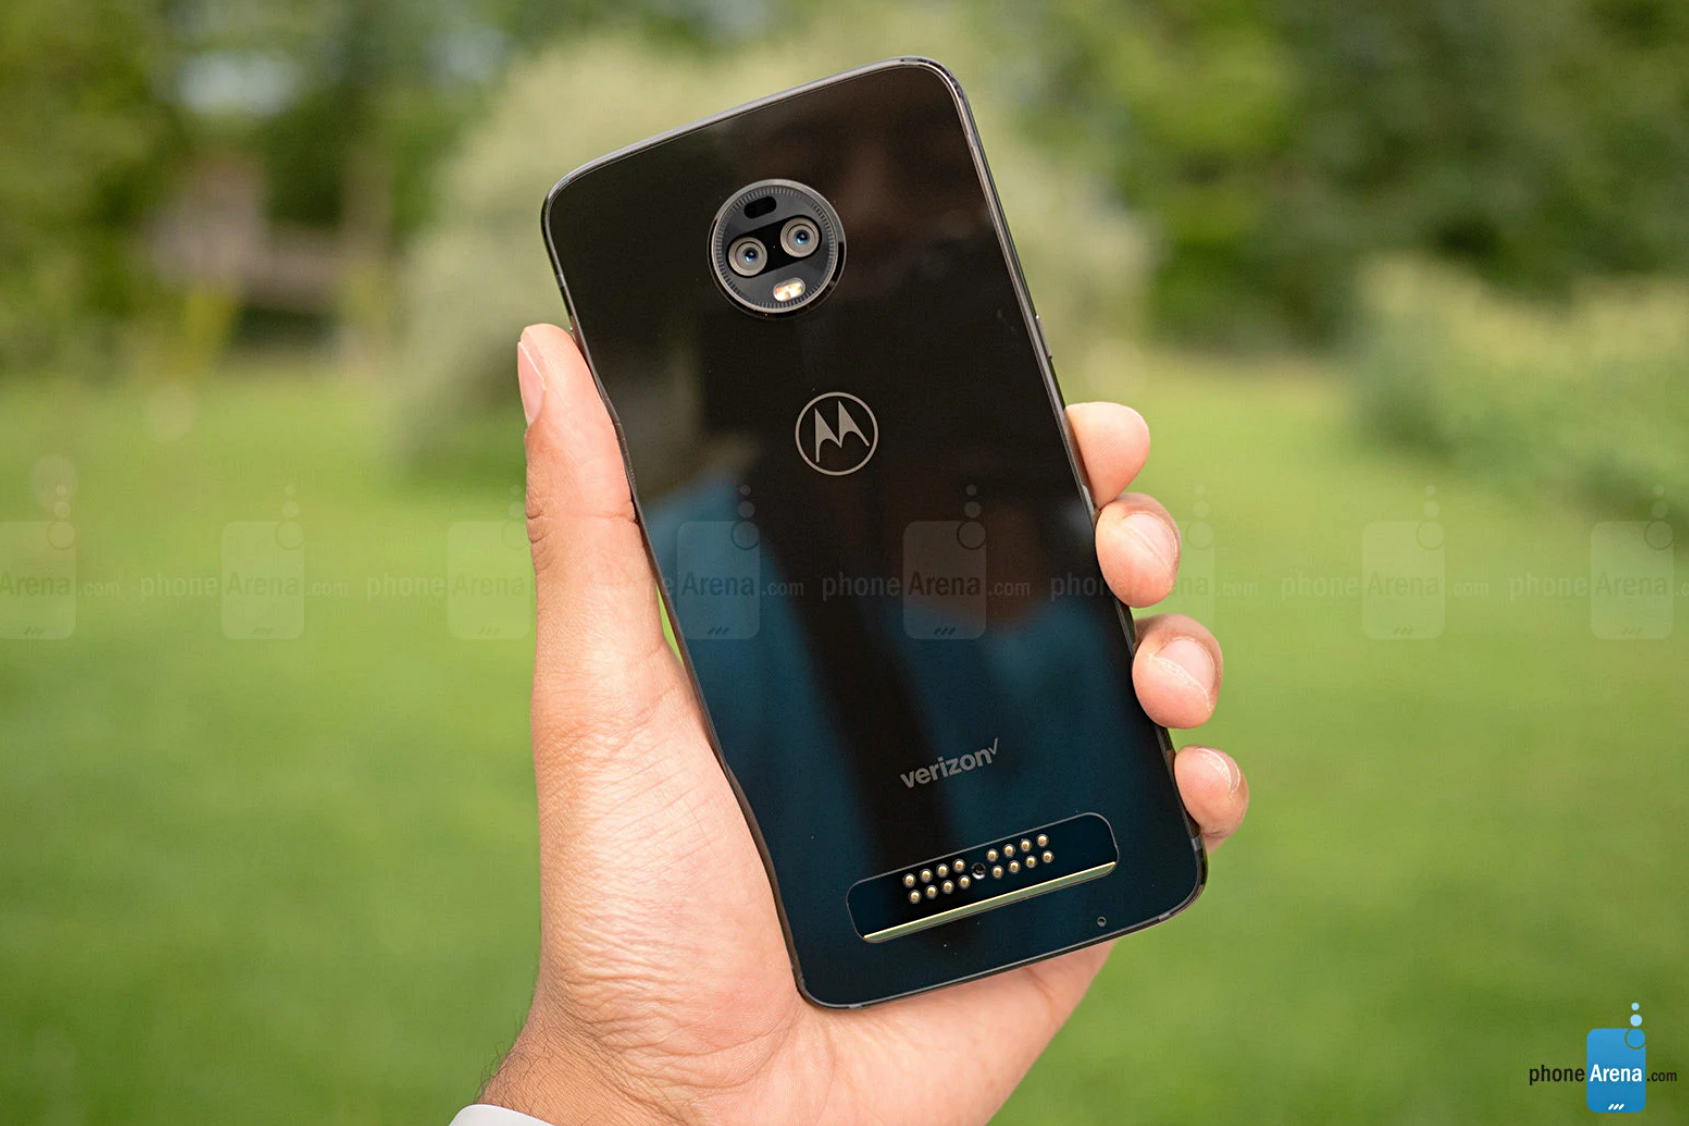 Motorola's Moto Z3 was one of the many Moto Z phones with modular capabilities. - Is Motorola afraid of competing with Samsung and Apple? The confusing tale of how not to make a flagship